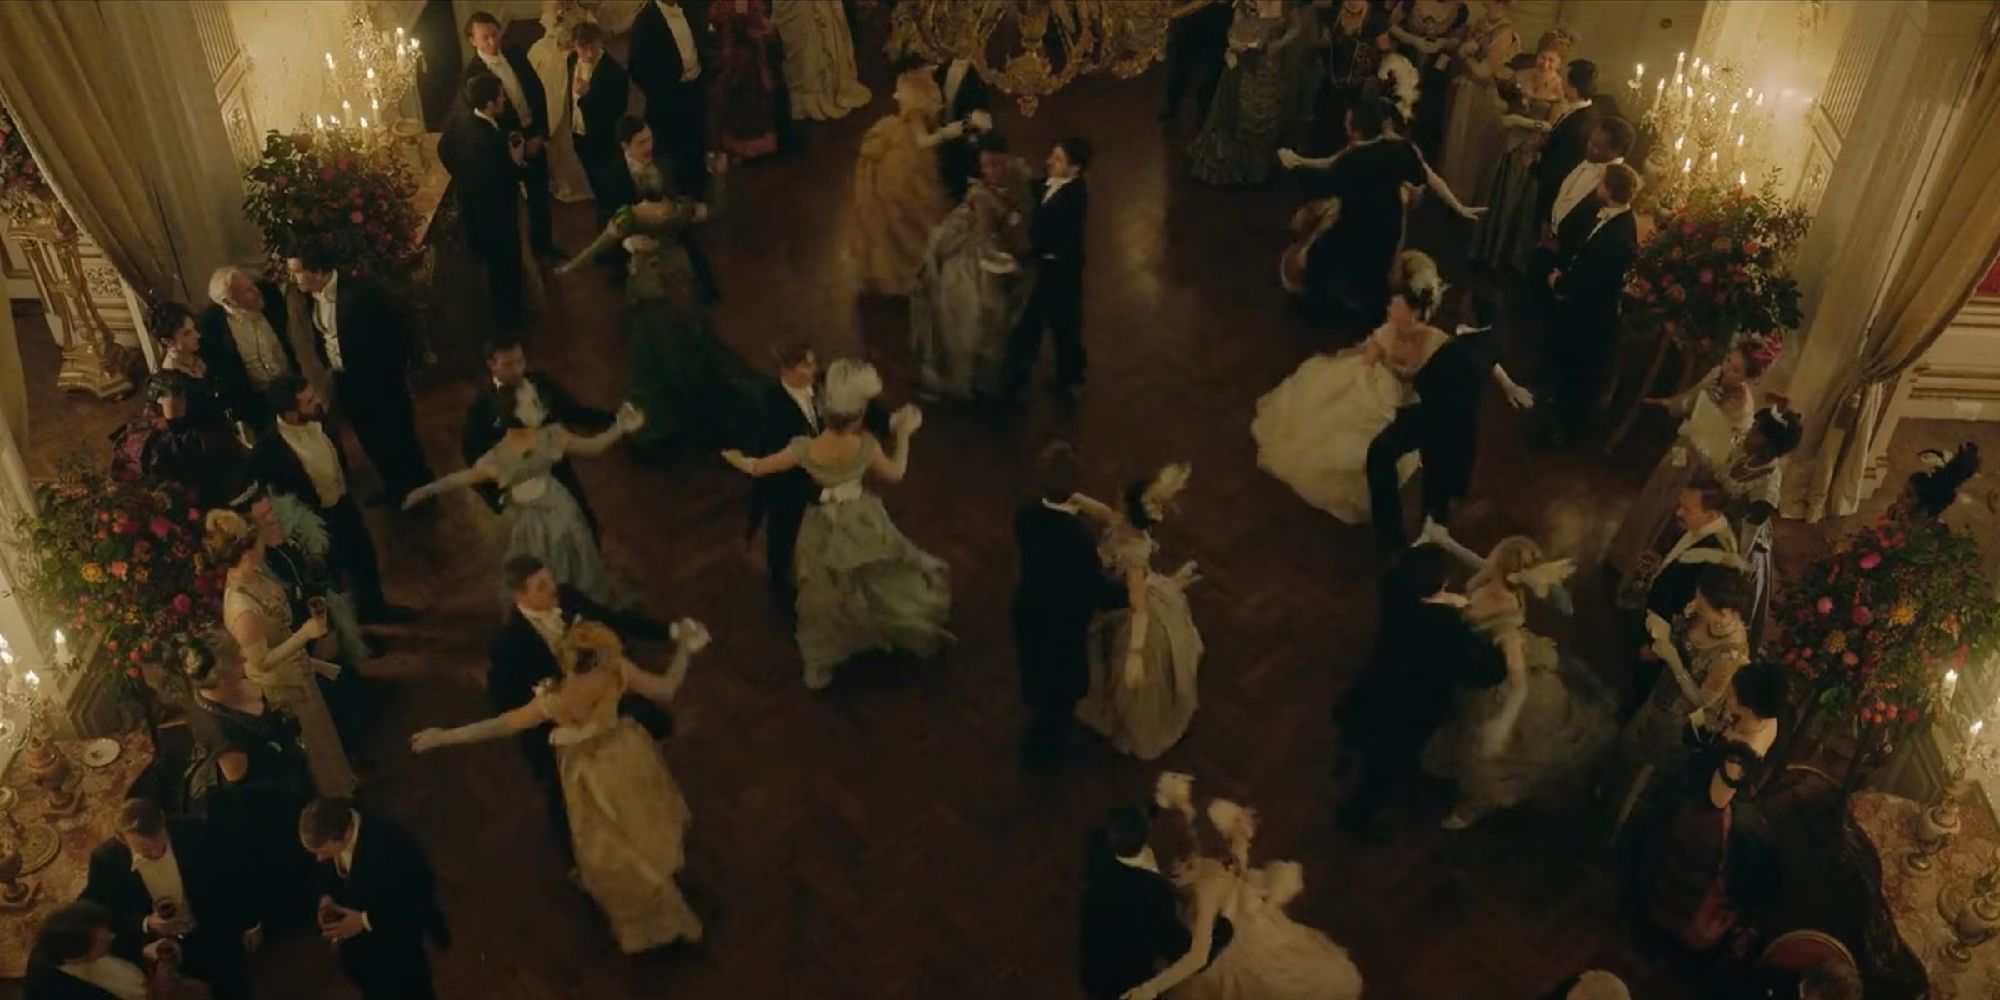 A bird's eye view shot of people dancing at a ball in Enola Holmes 